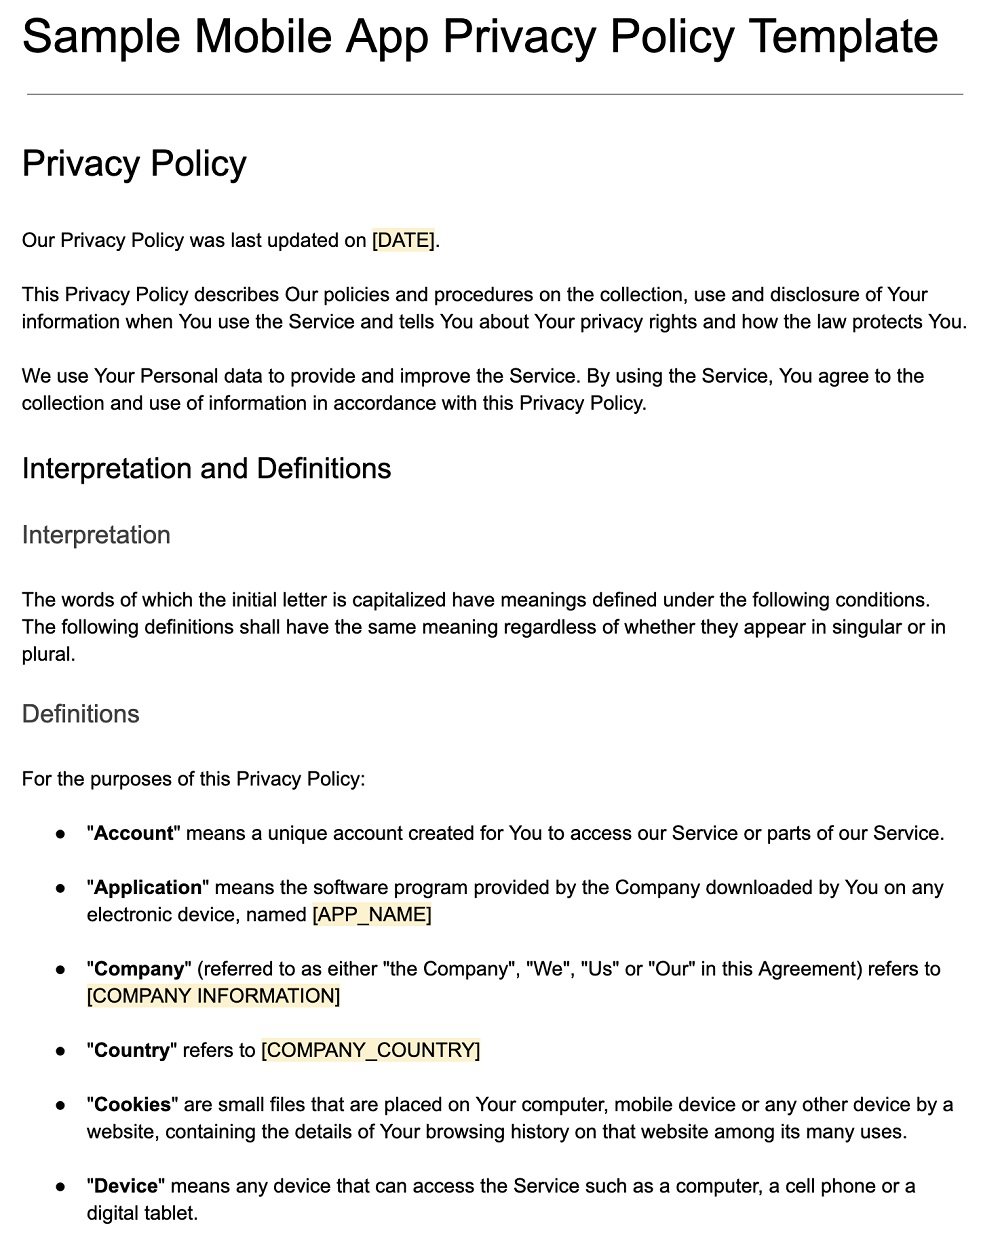 Screenshot of the Sample Mobile App Privacy Policy Template